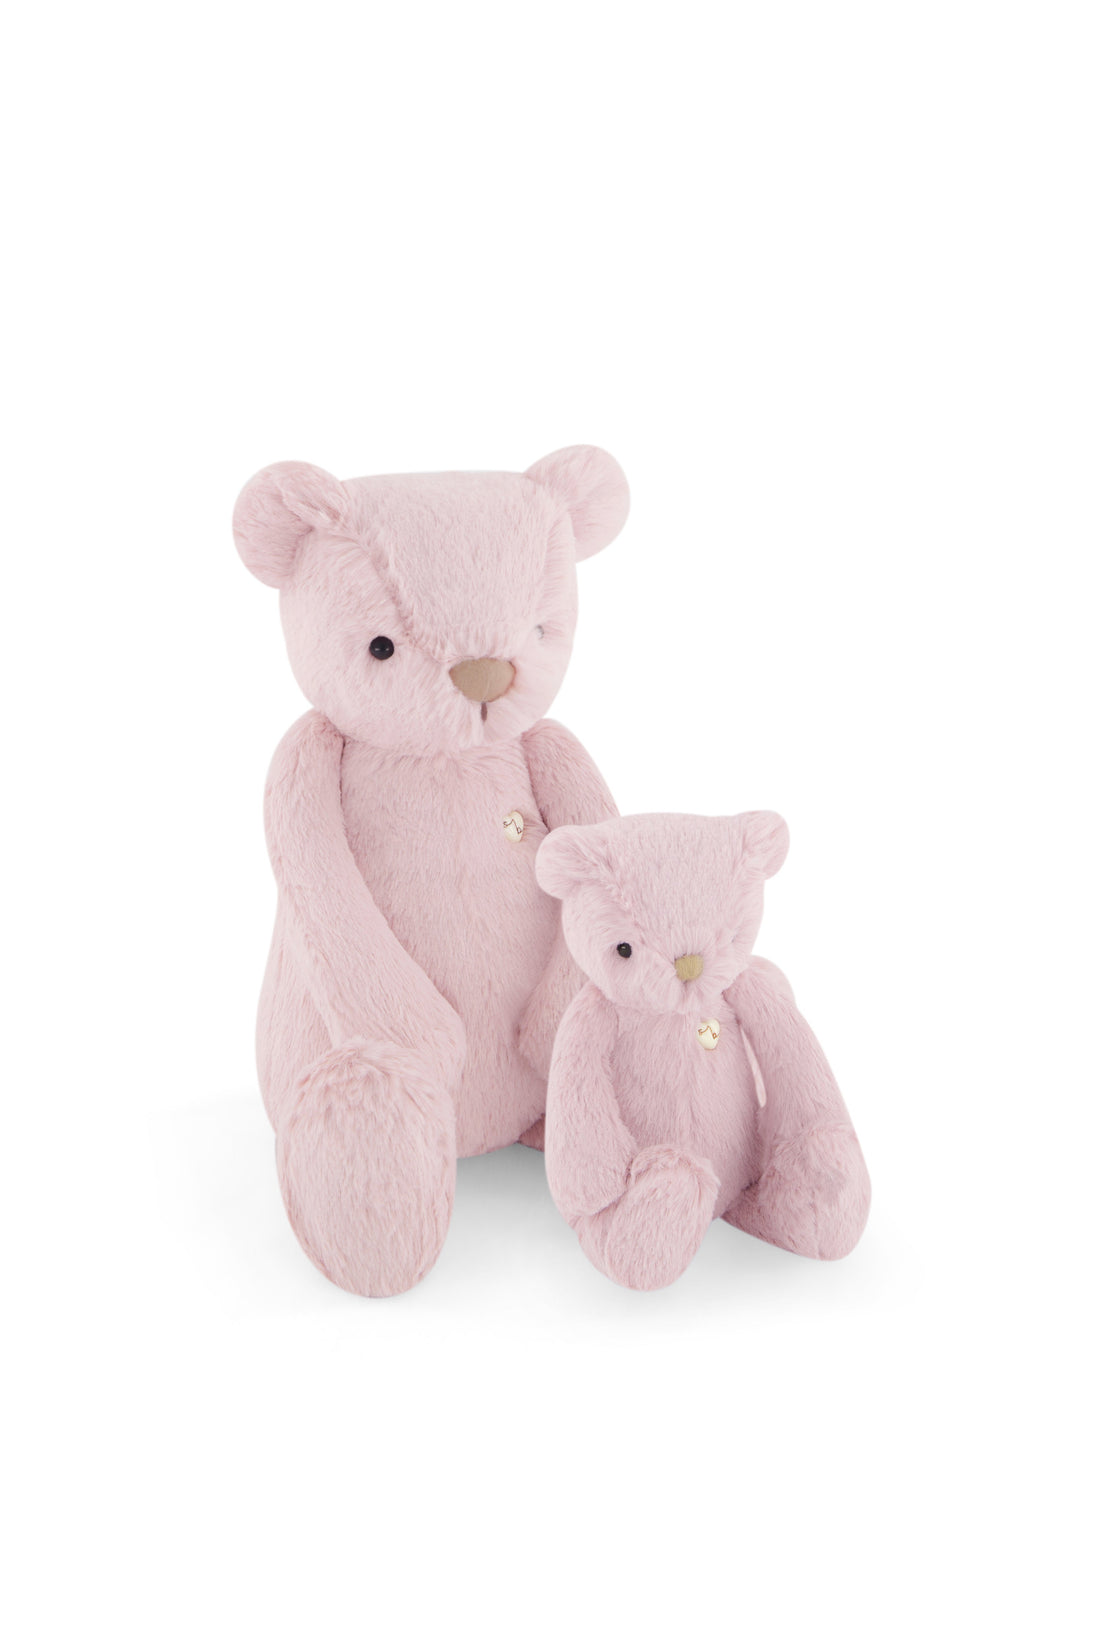 Snuggle Bunnies - George the Bear - Powder Pink Childrens Toy from Jamie Kay USA